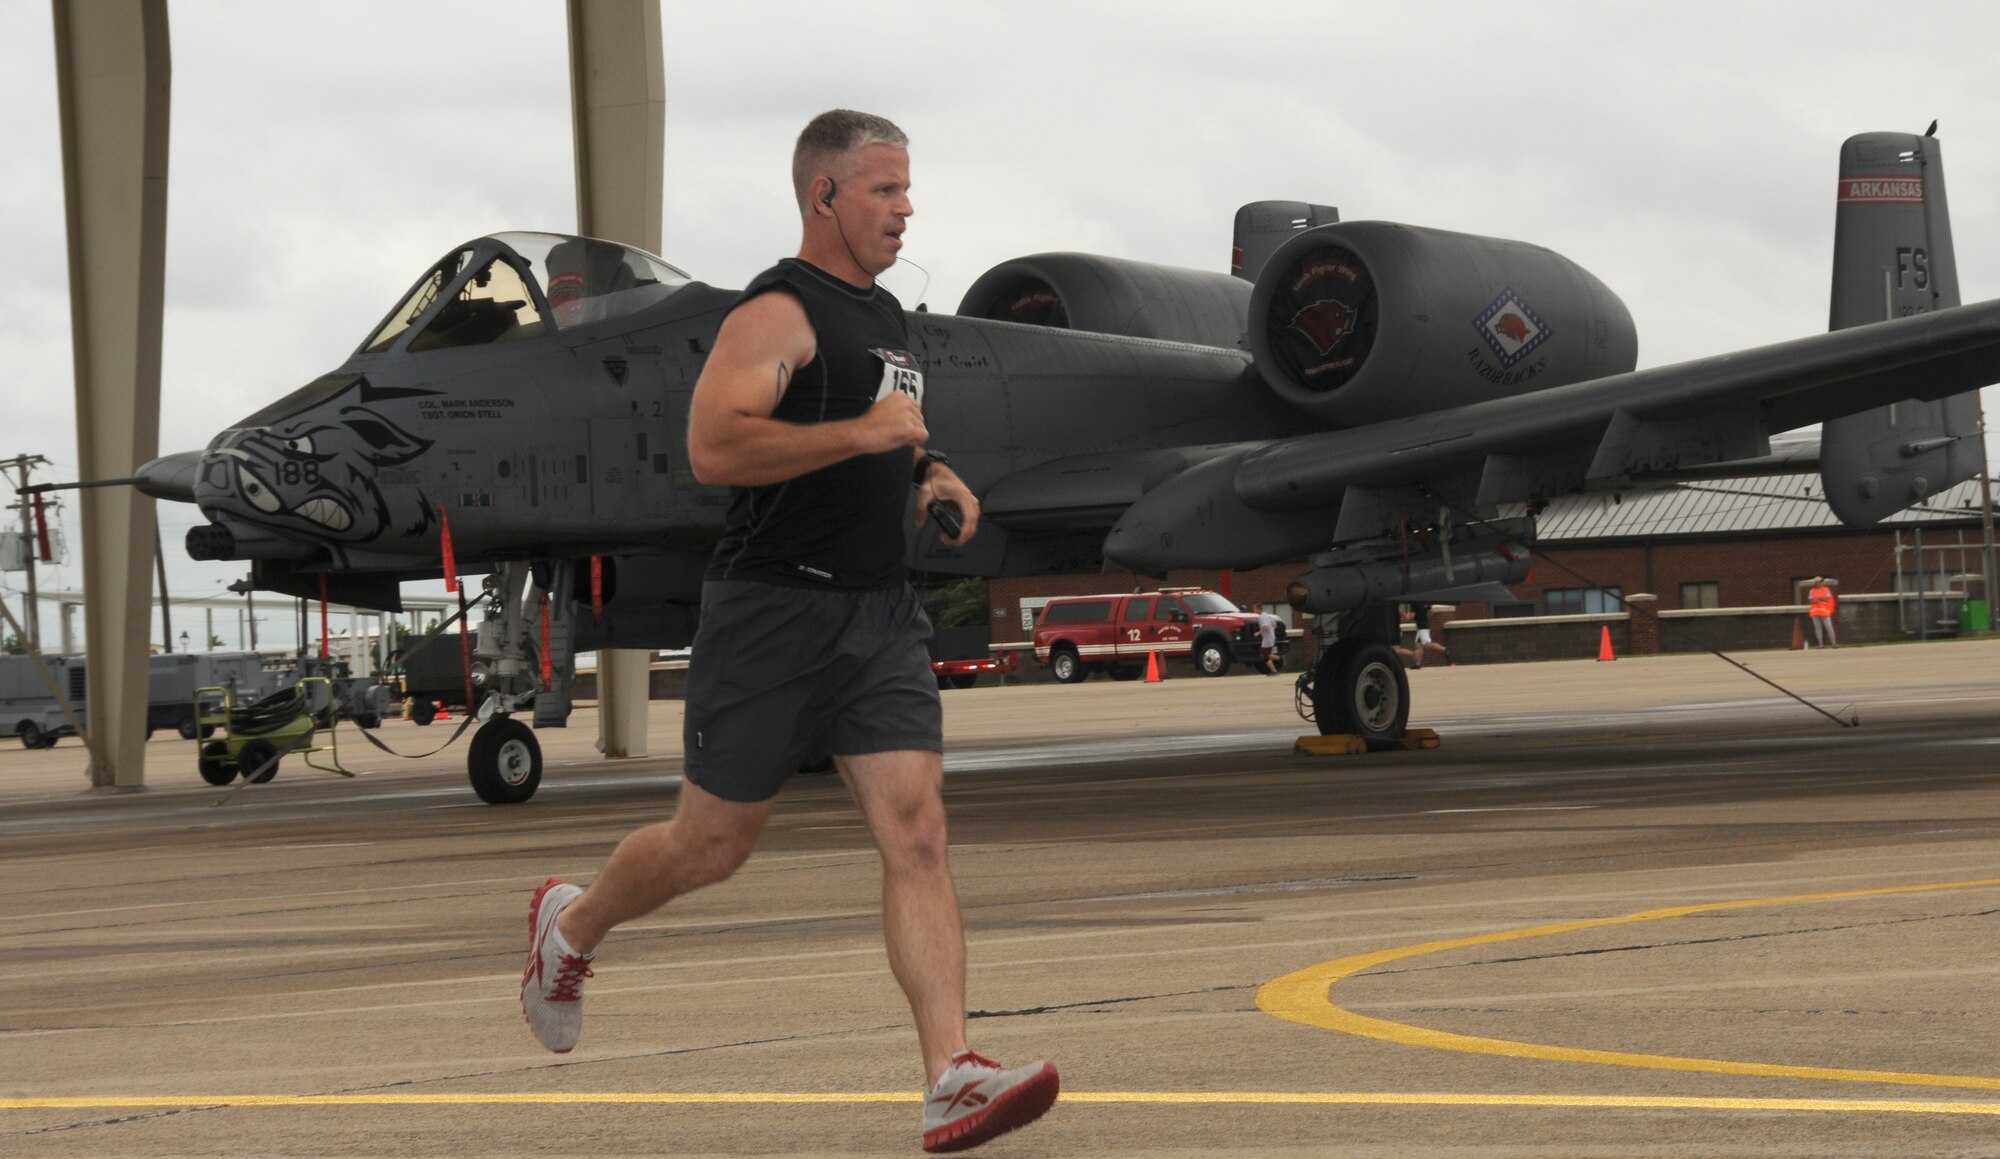 Tech. Sgt. Timothy Holland, a force protection specialist with the 188th Security Forces Squadron, runs in the 188th’s inaugural Hawg Jawg 5K run during Wingman Day at Ebbing Air National Guard Base, Fort Smith, Ark., June 1, 2013.Wingman Day activities included a Sexual Assault Prevention and Response training block, Hawg Jawg 5K and the four pillars of Airmen fitness: Physical, mental, spiritual and social. (U.S. Air National Guard photo by Senior Airman John Hillier/188th Fighter Wing Public Affairs)